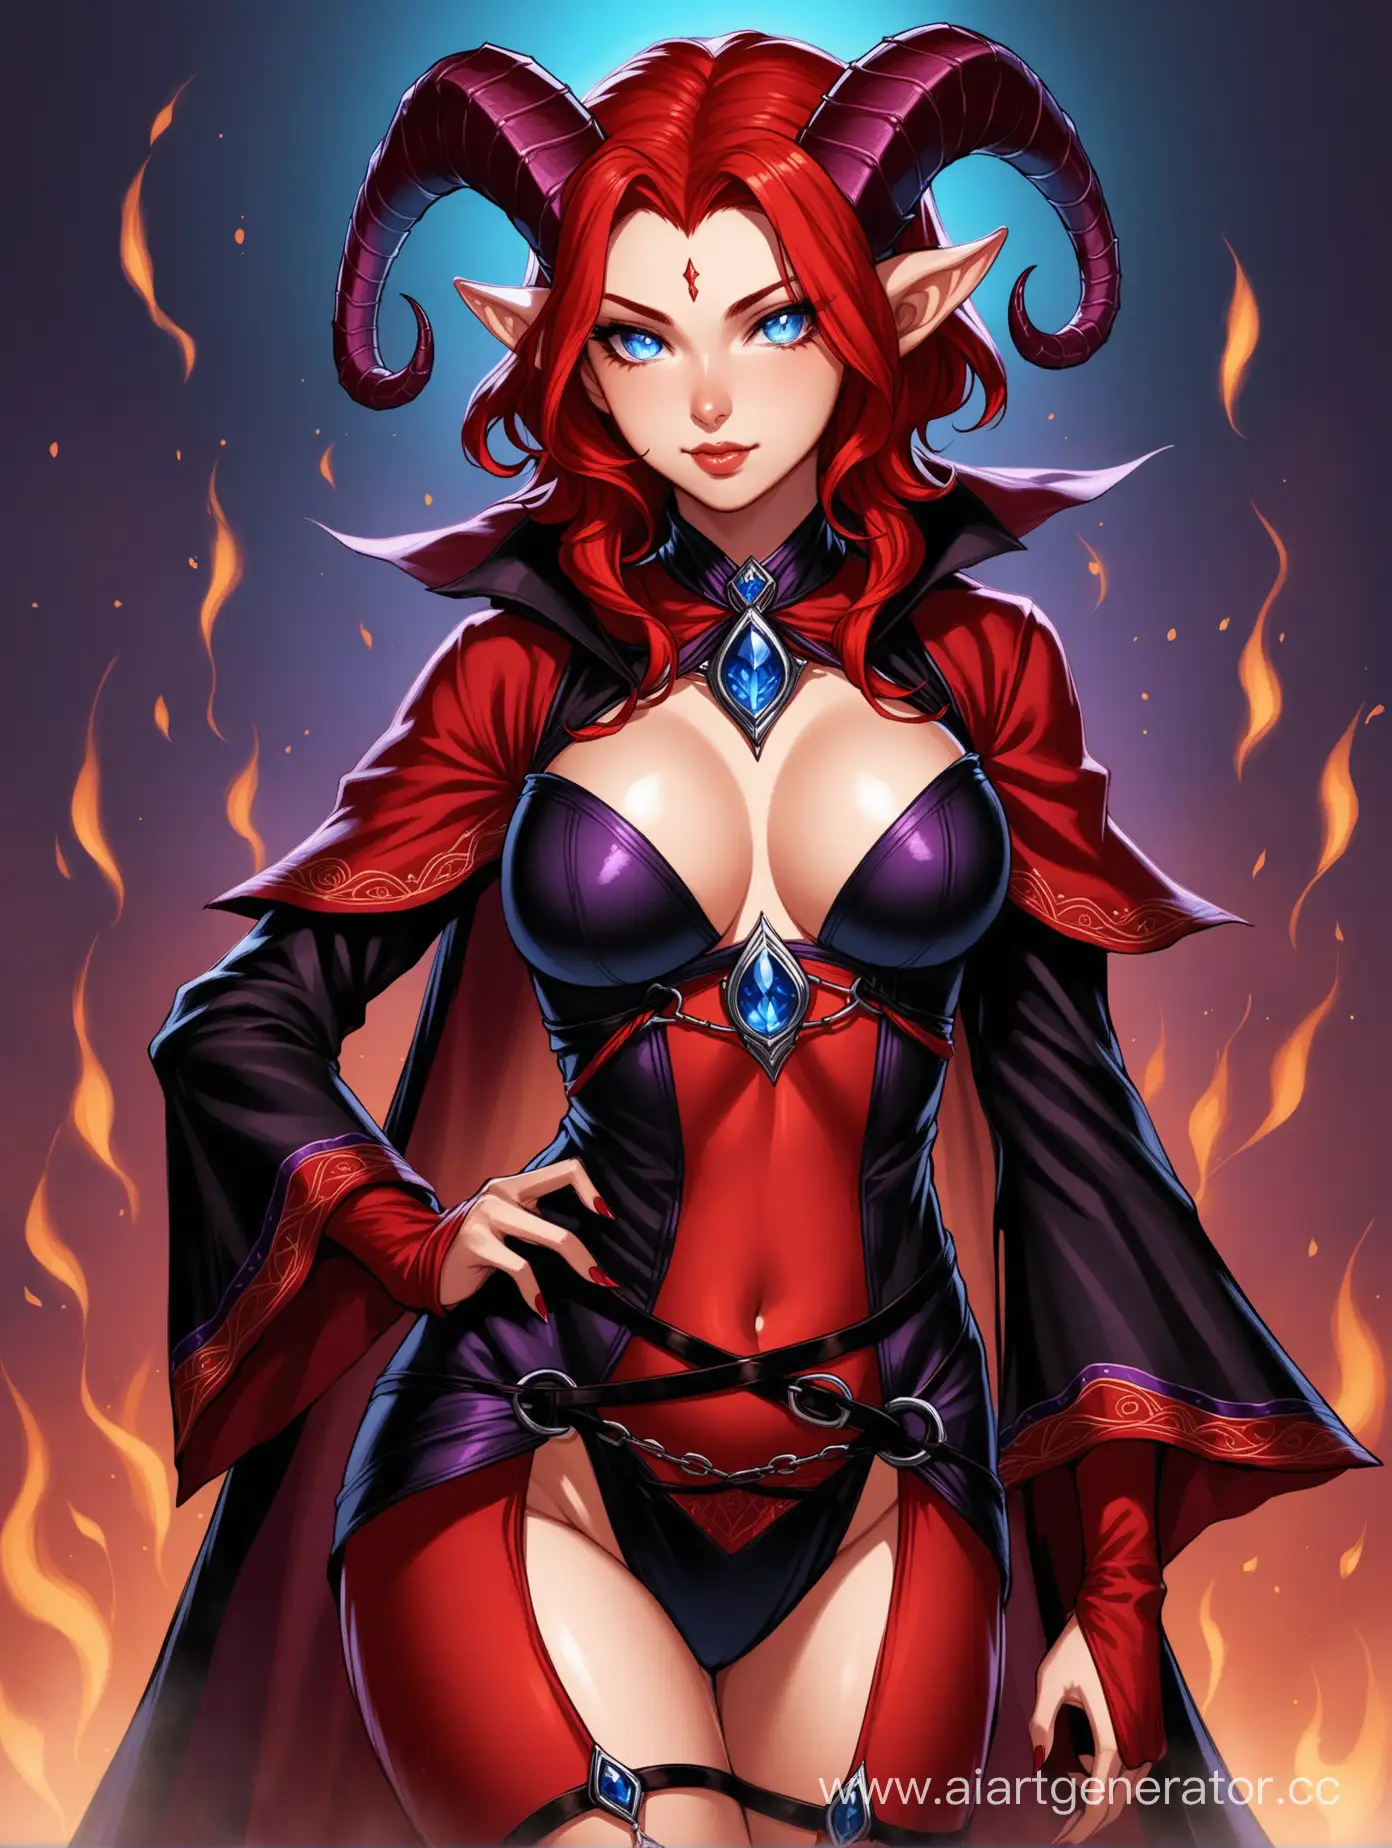 Seductive-Tiefling-Warlock-in-Erotic-Red-and-Black-Attire-with-Sapphire-Eyes